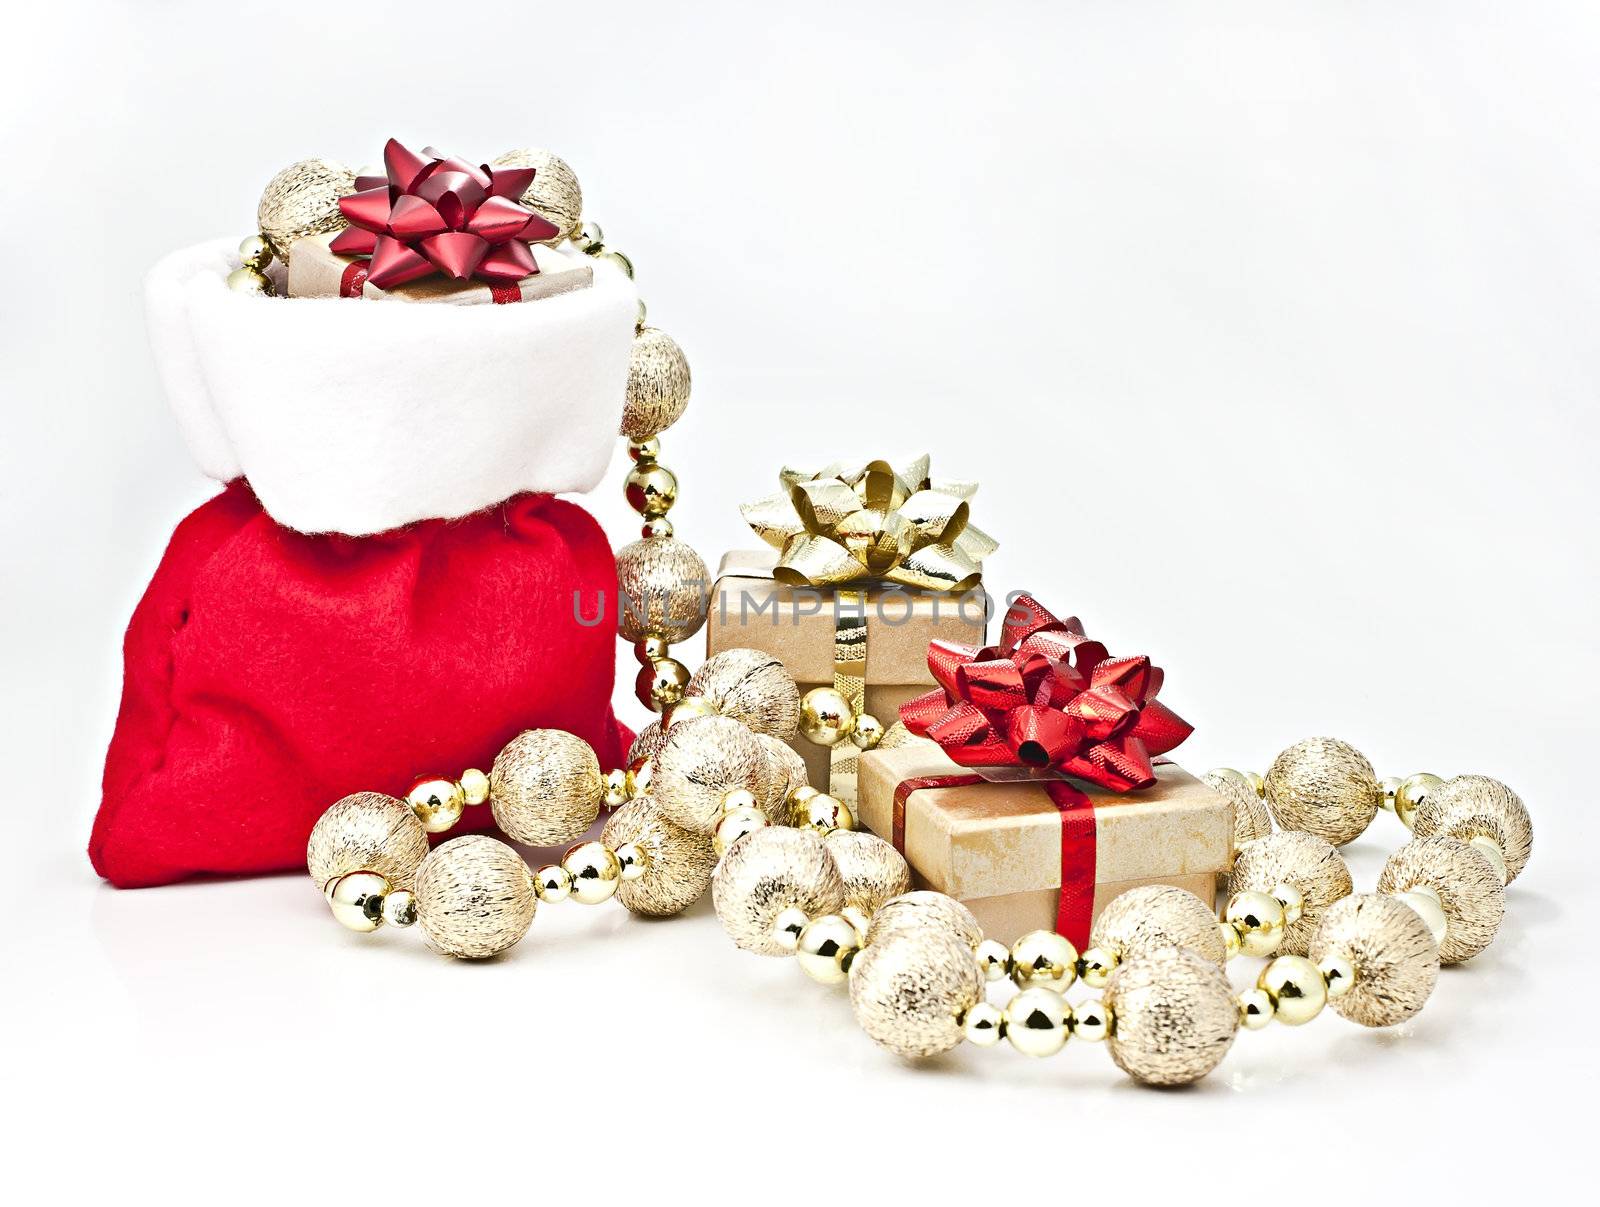 On a white background Christmas gift bag with gifts and golden ball strings.
